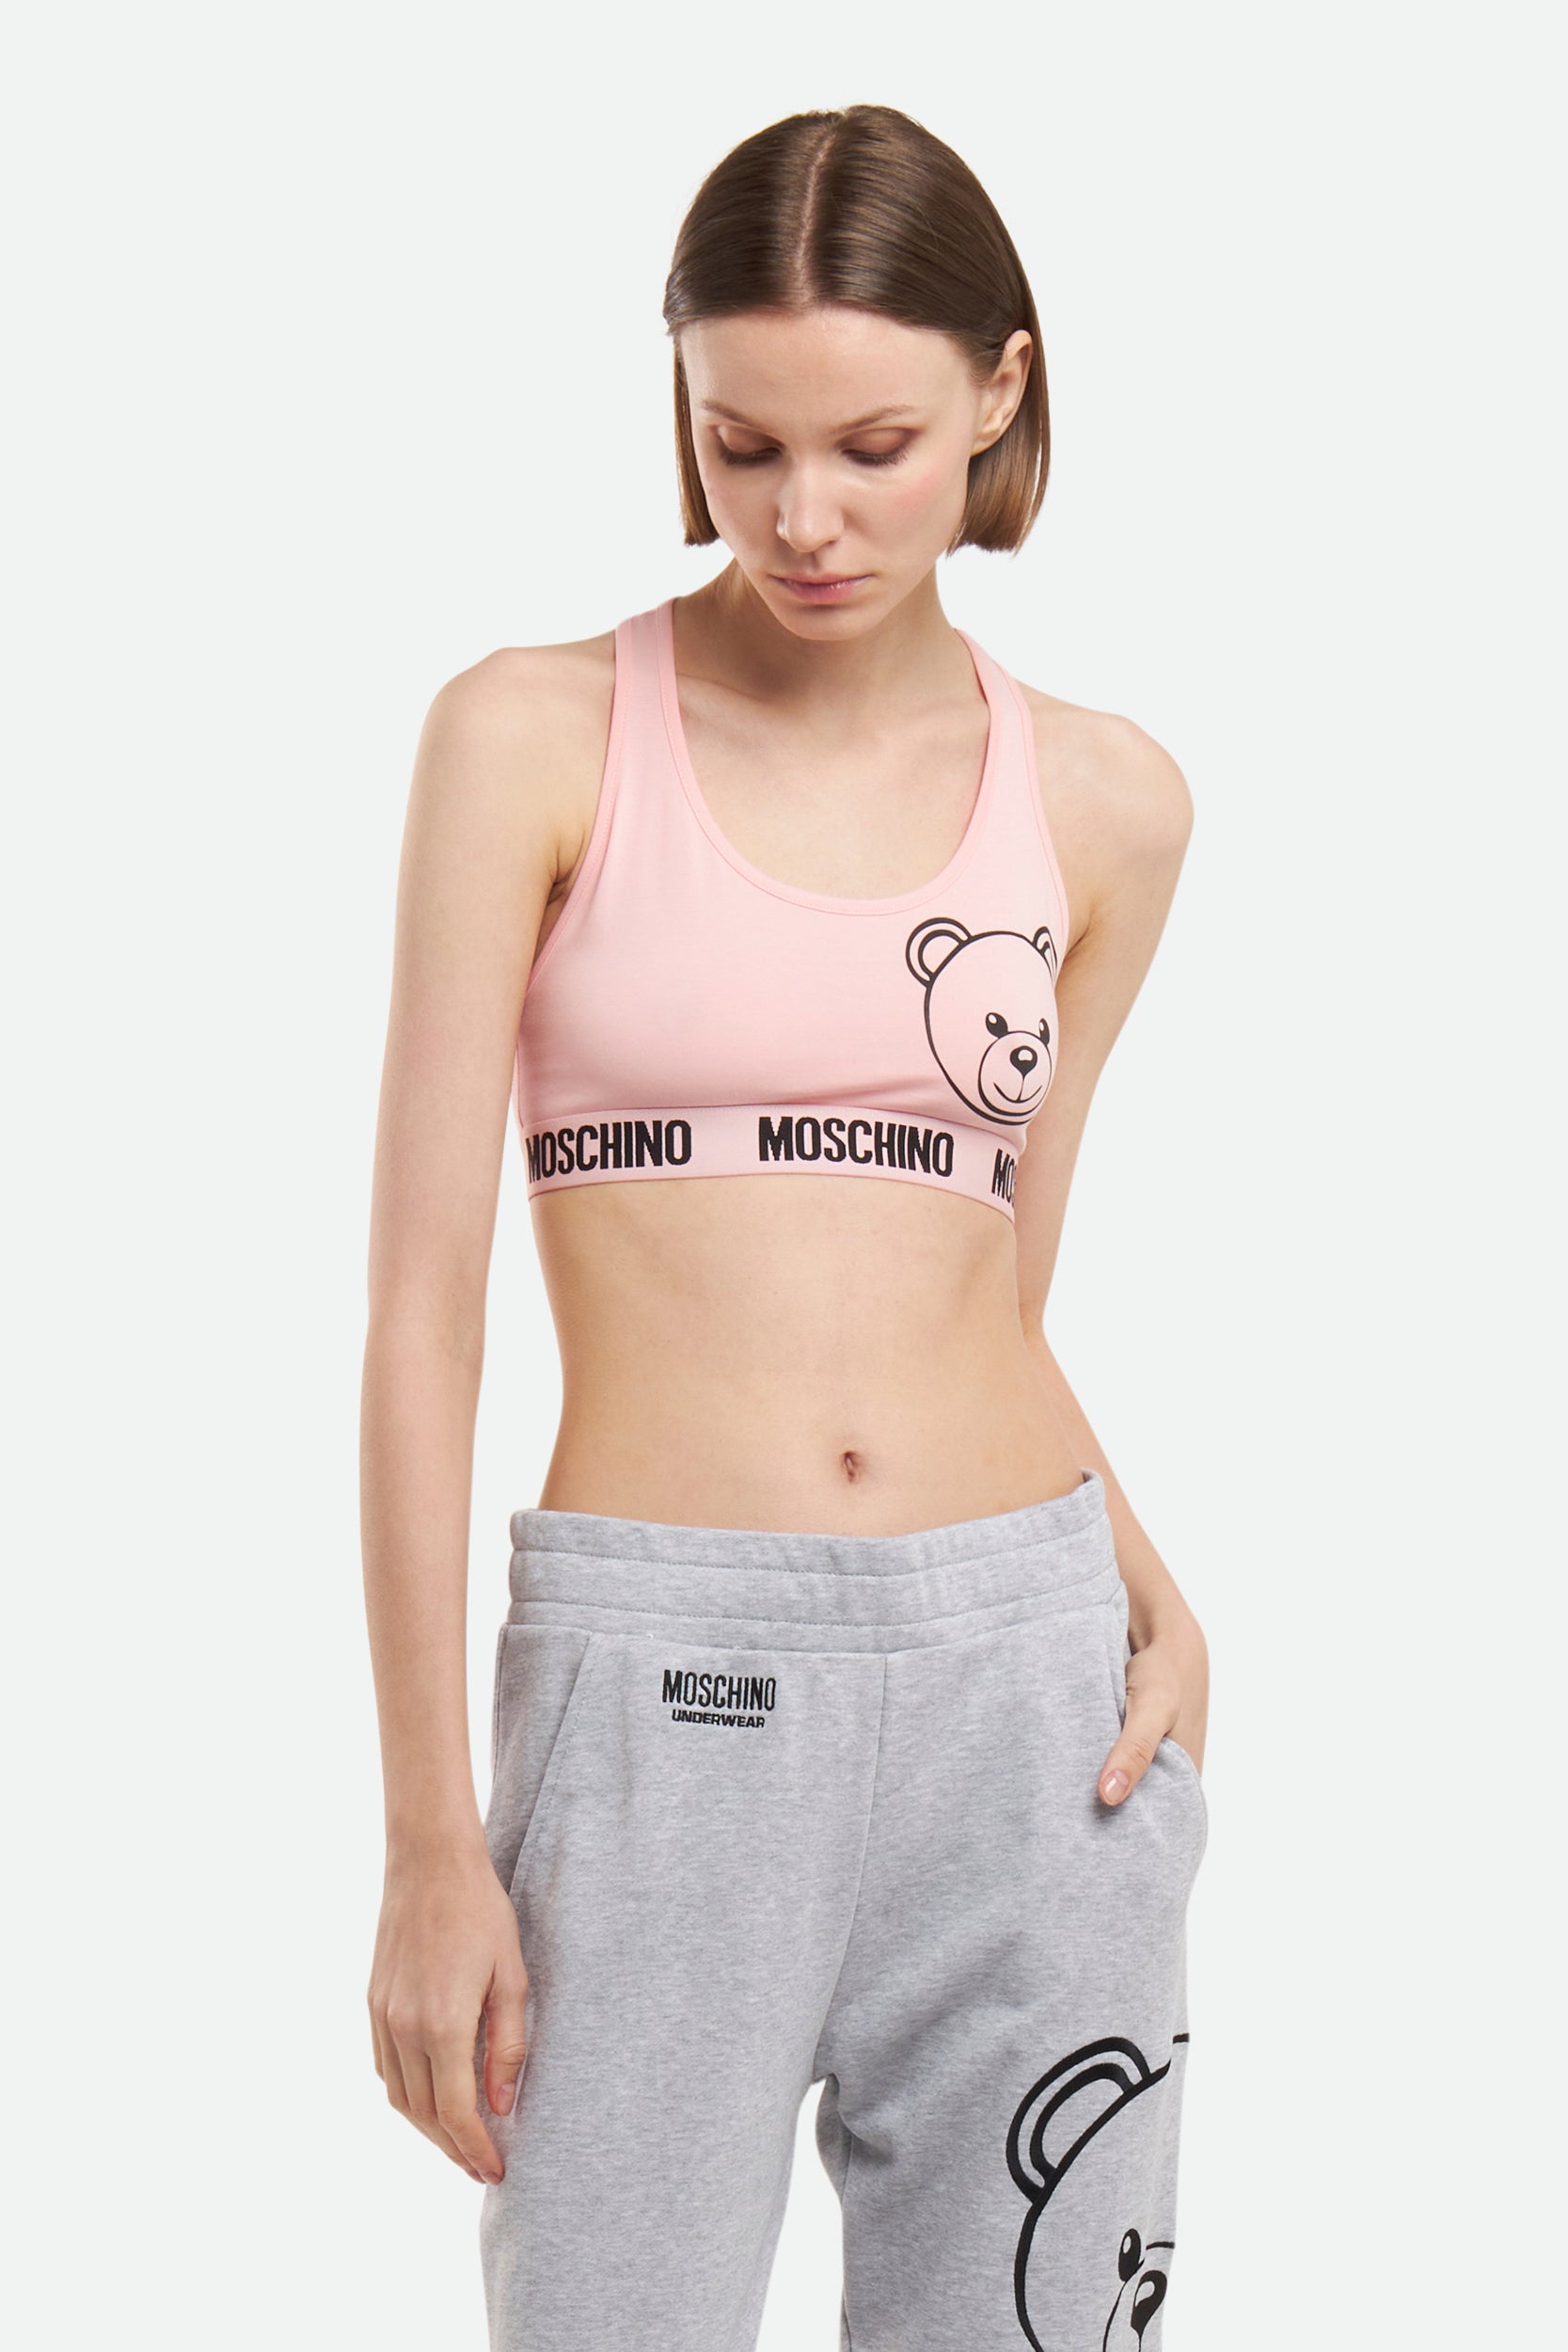 Moschino Top Pink